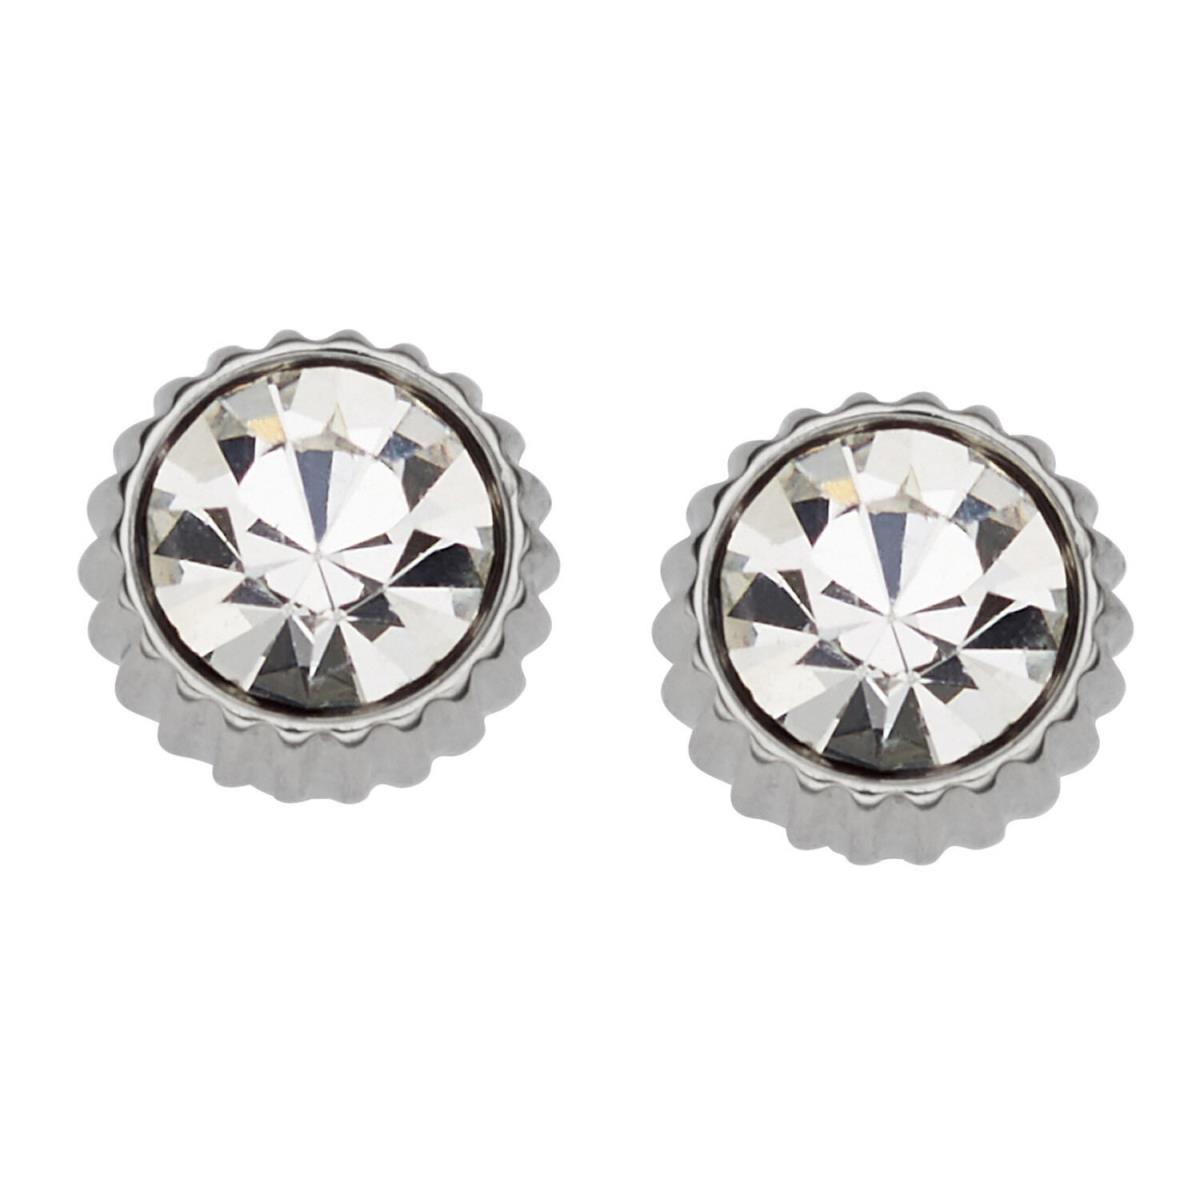 Fossil Silver Tone Coin Edge Crystals Stud Earrings JF02231040